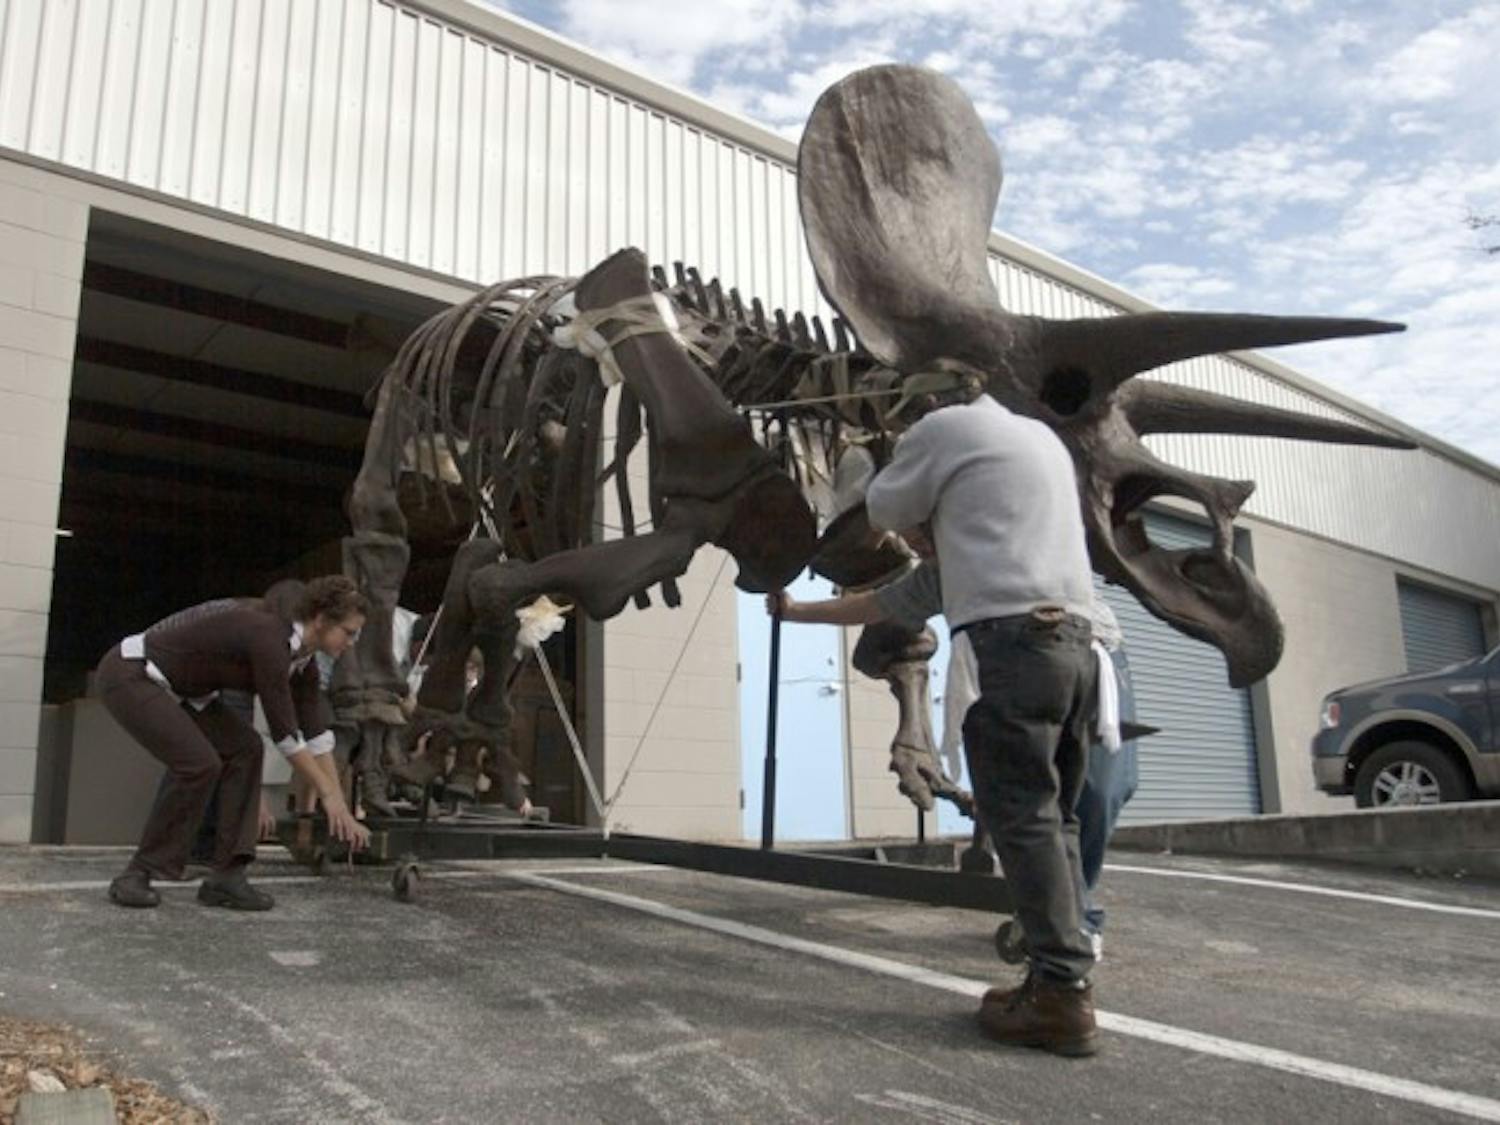 A triceratops skeleton cast is transported from storage onto a flatbed truck to be taken to the Florida Museum of Natural History on Monday. The dinosaur model will join 29 fossils, 19 color prints and five murals in the museum's new "Cruisin' the Fossil Freeway" exhibit.